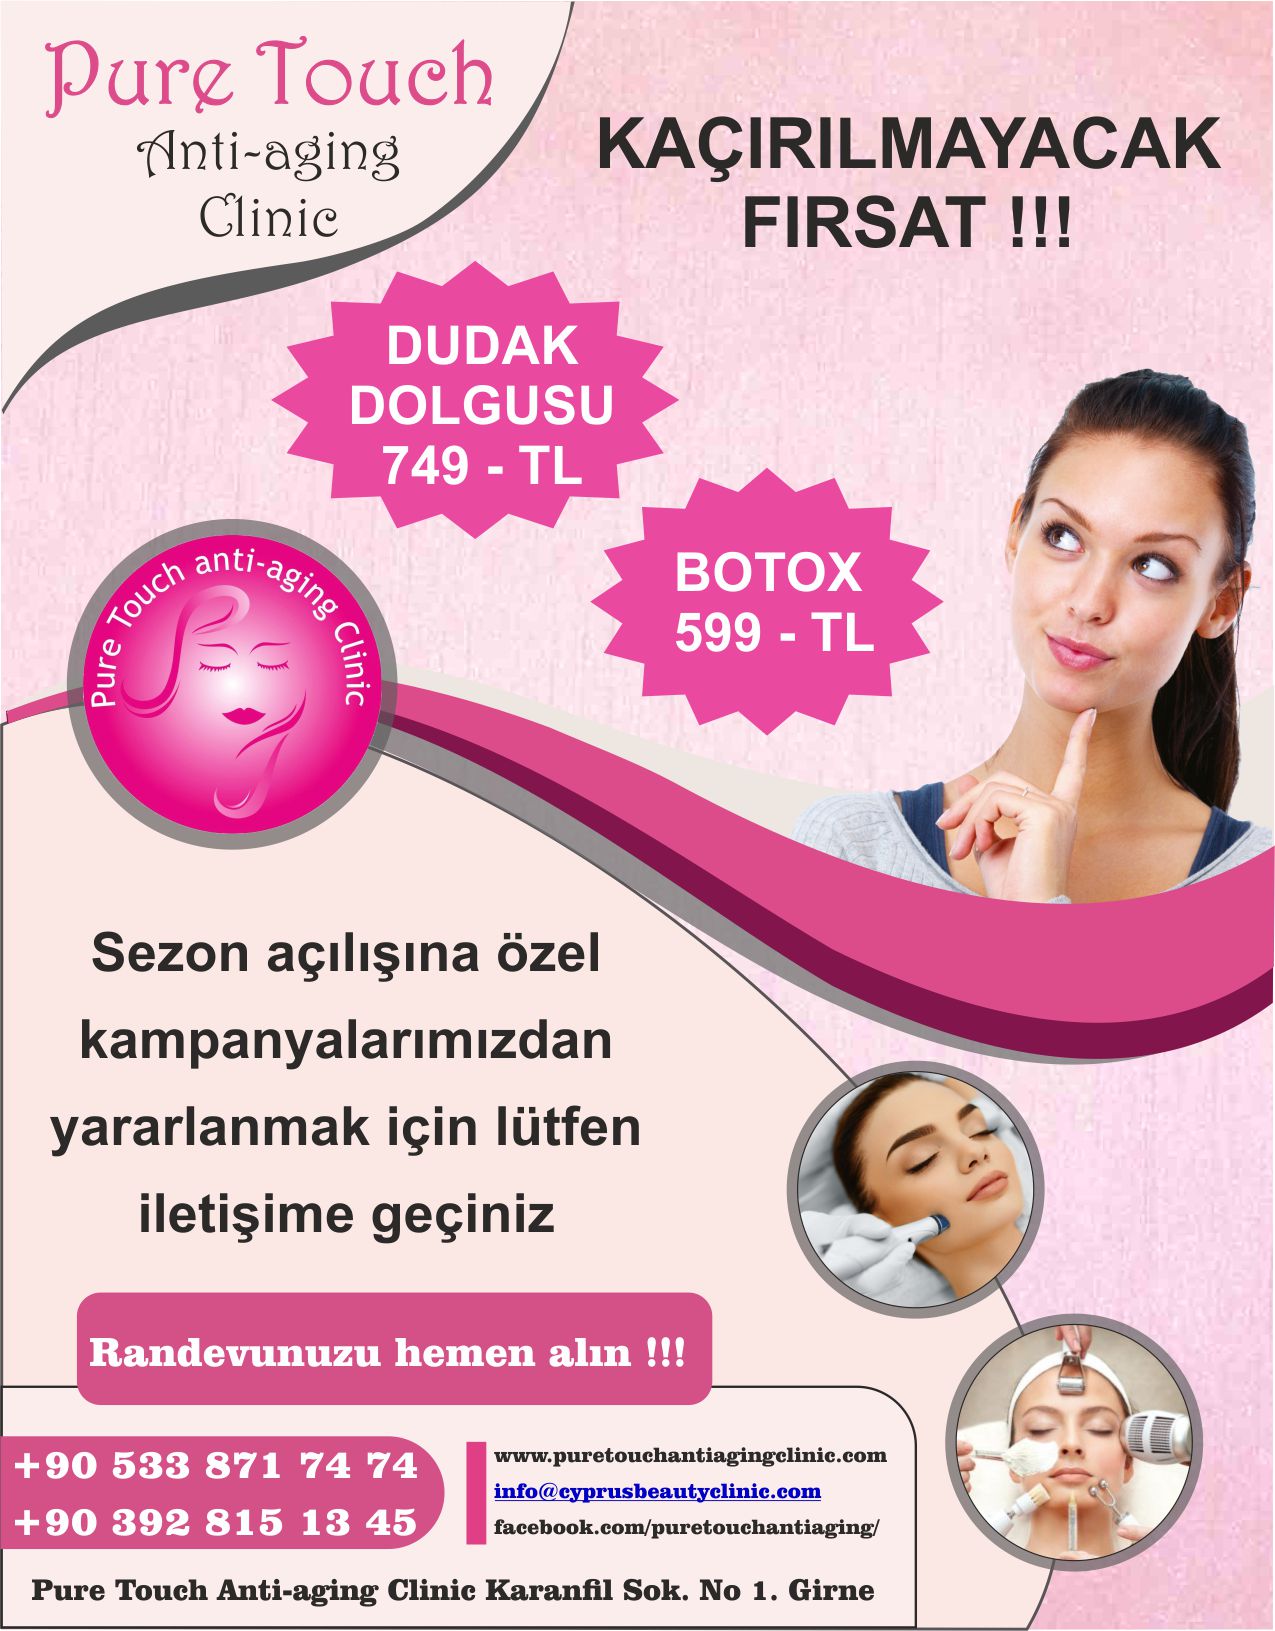 Touch clinic pure About